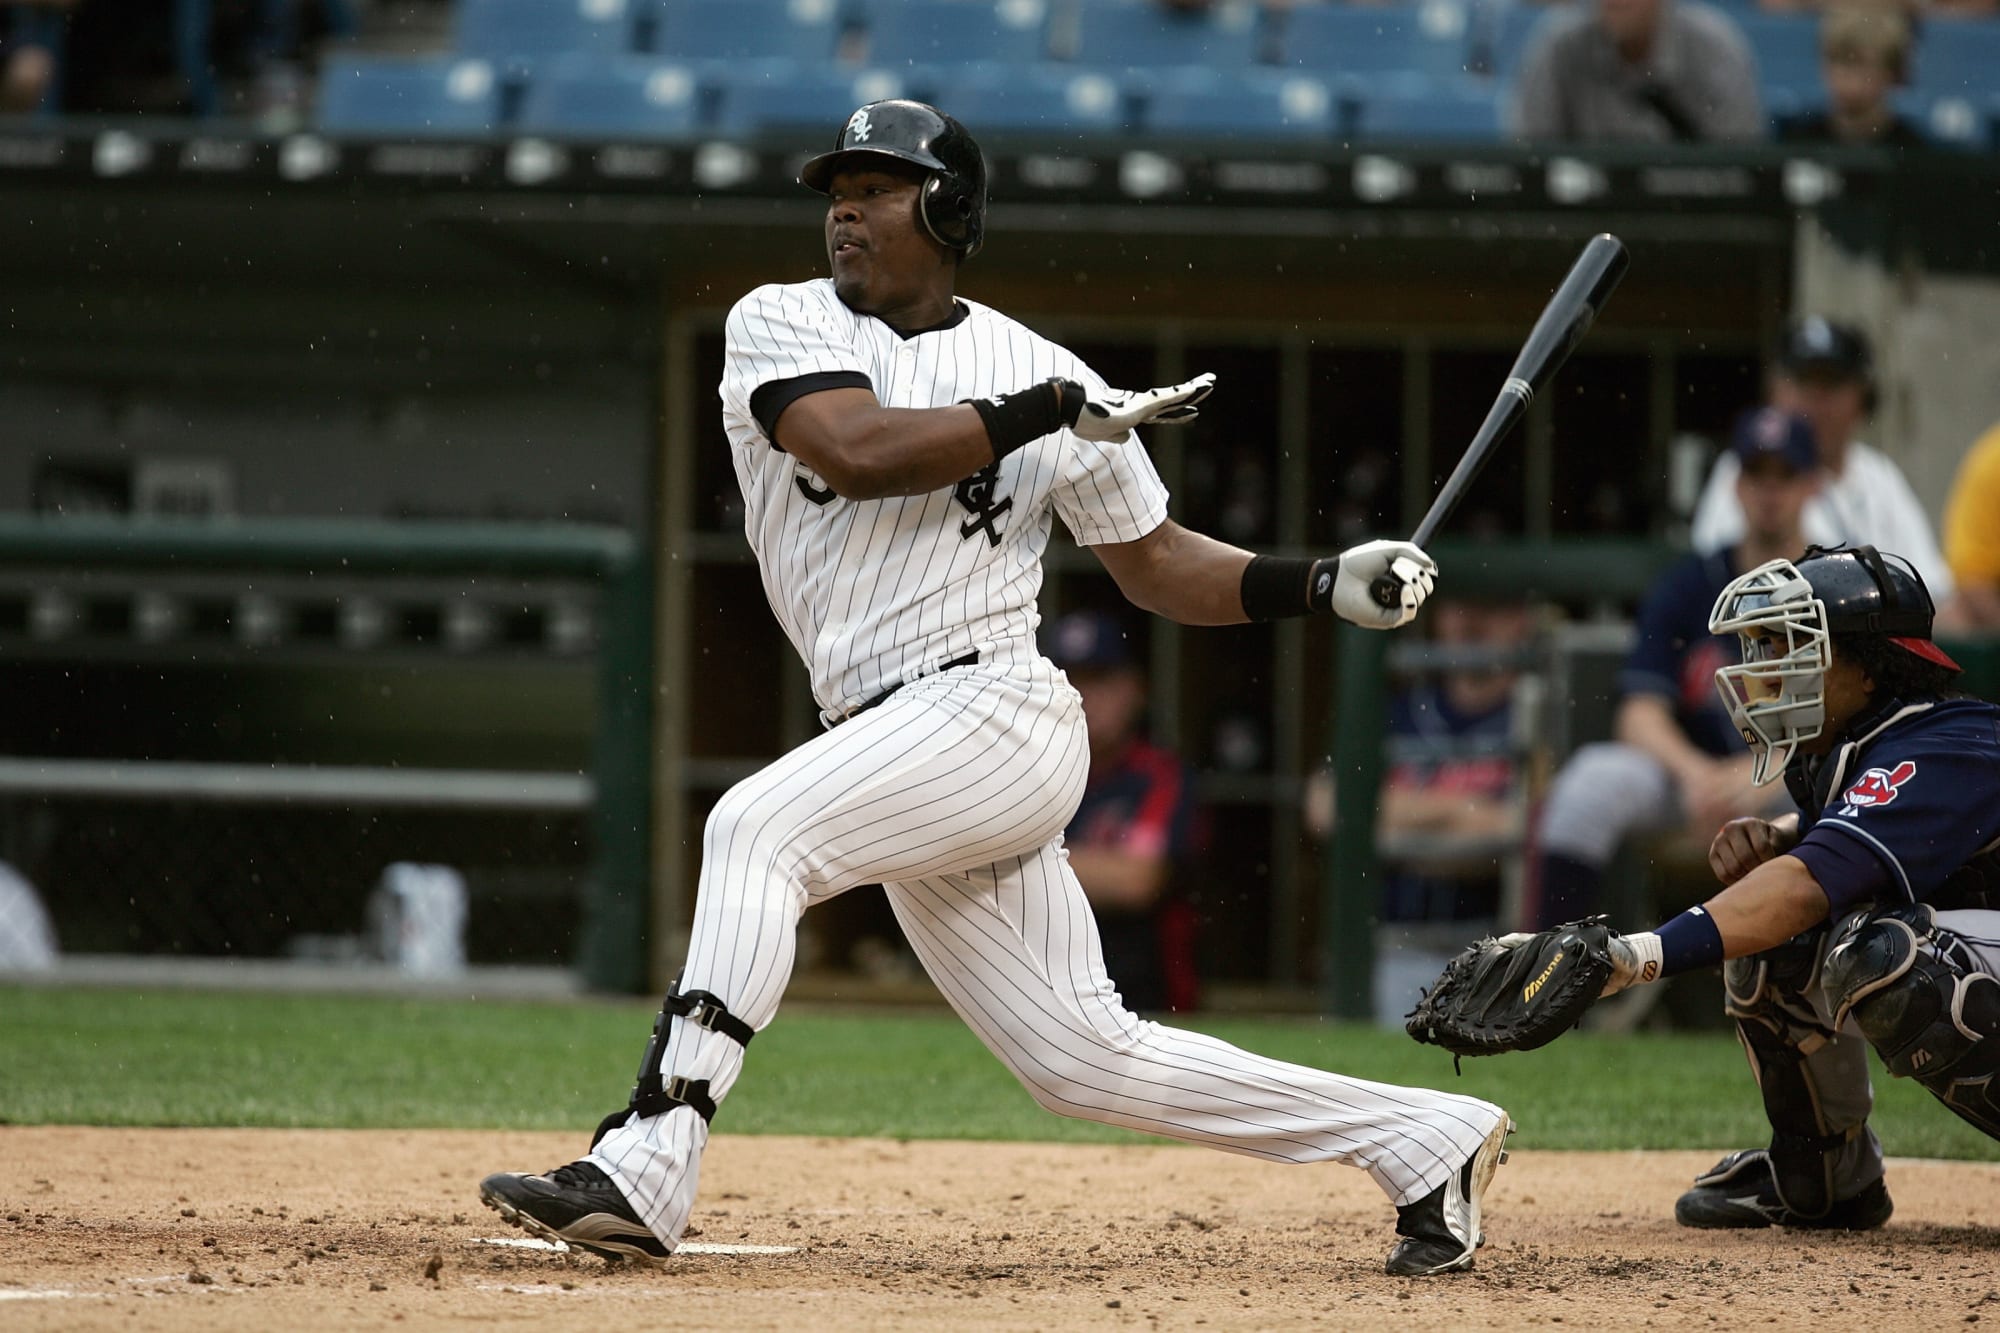 Chicago White Sox: Juan Uribe was so underrated in 2005